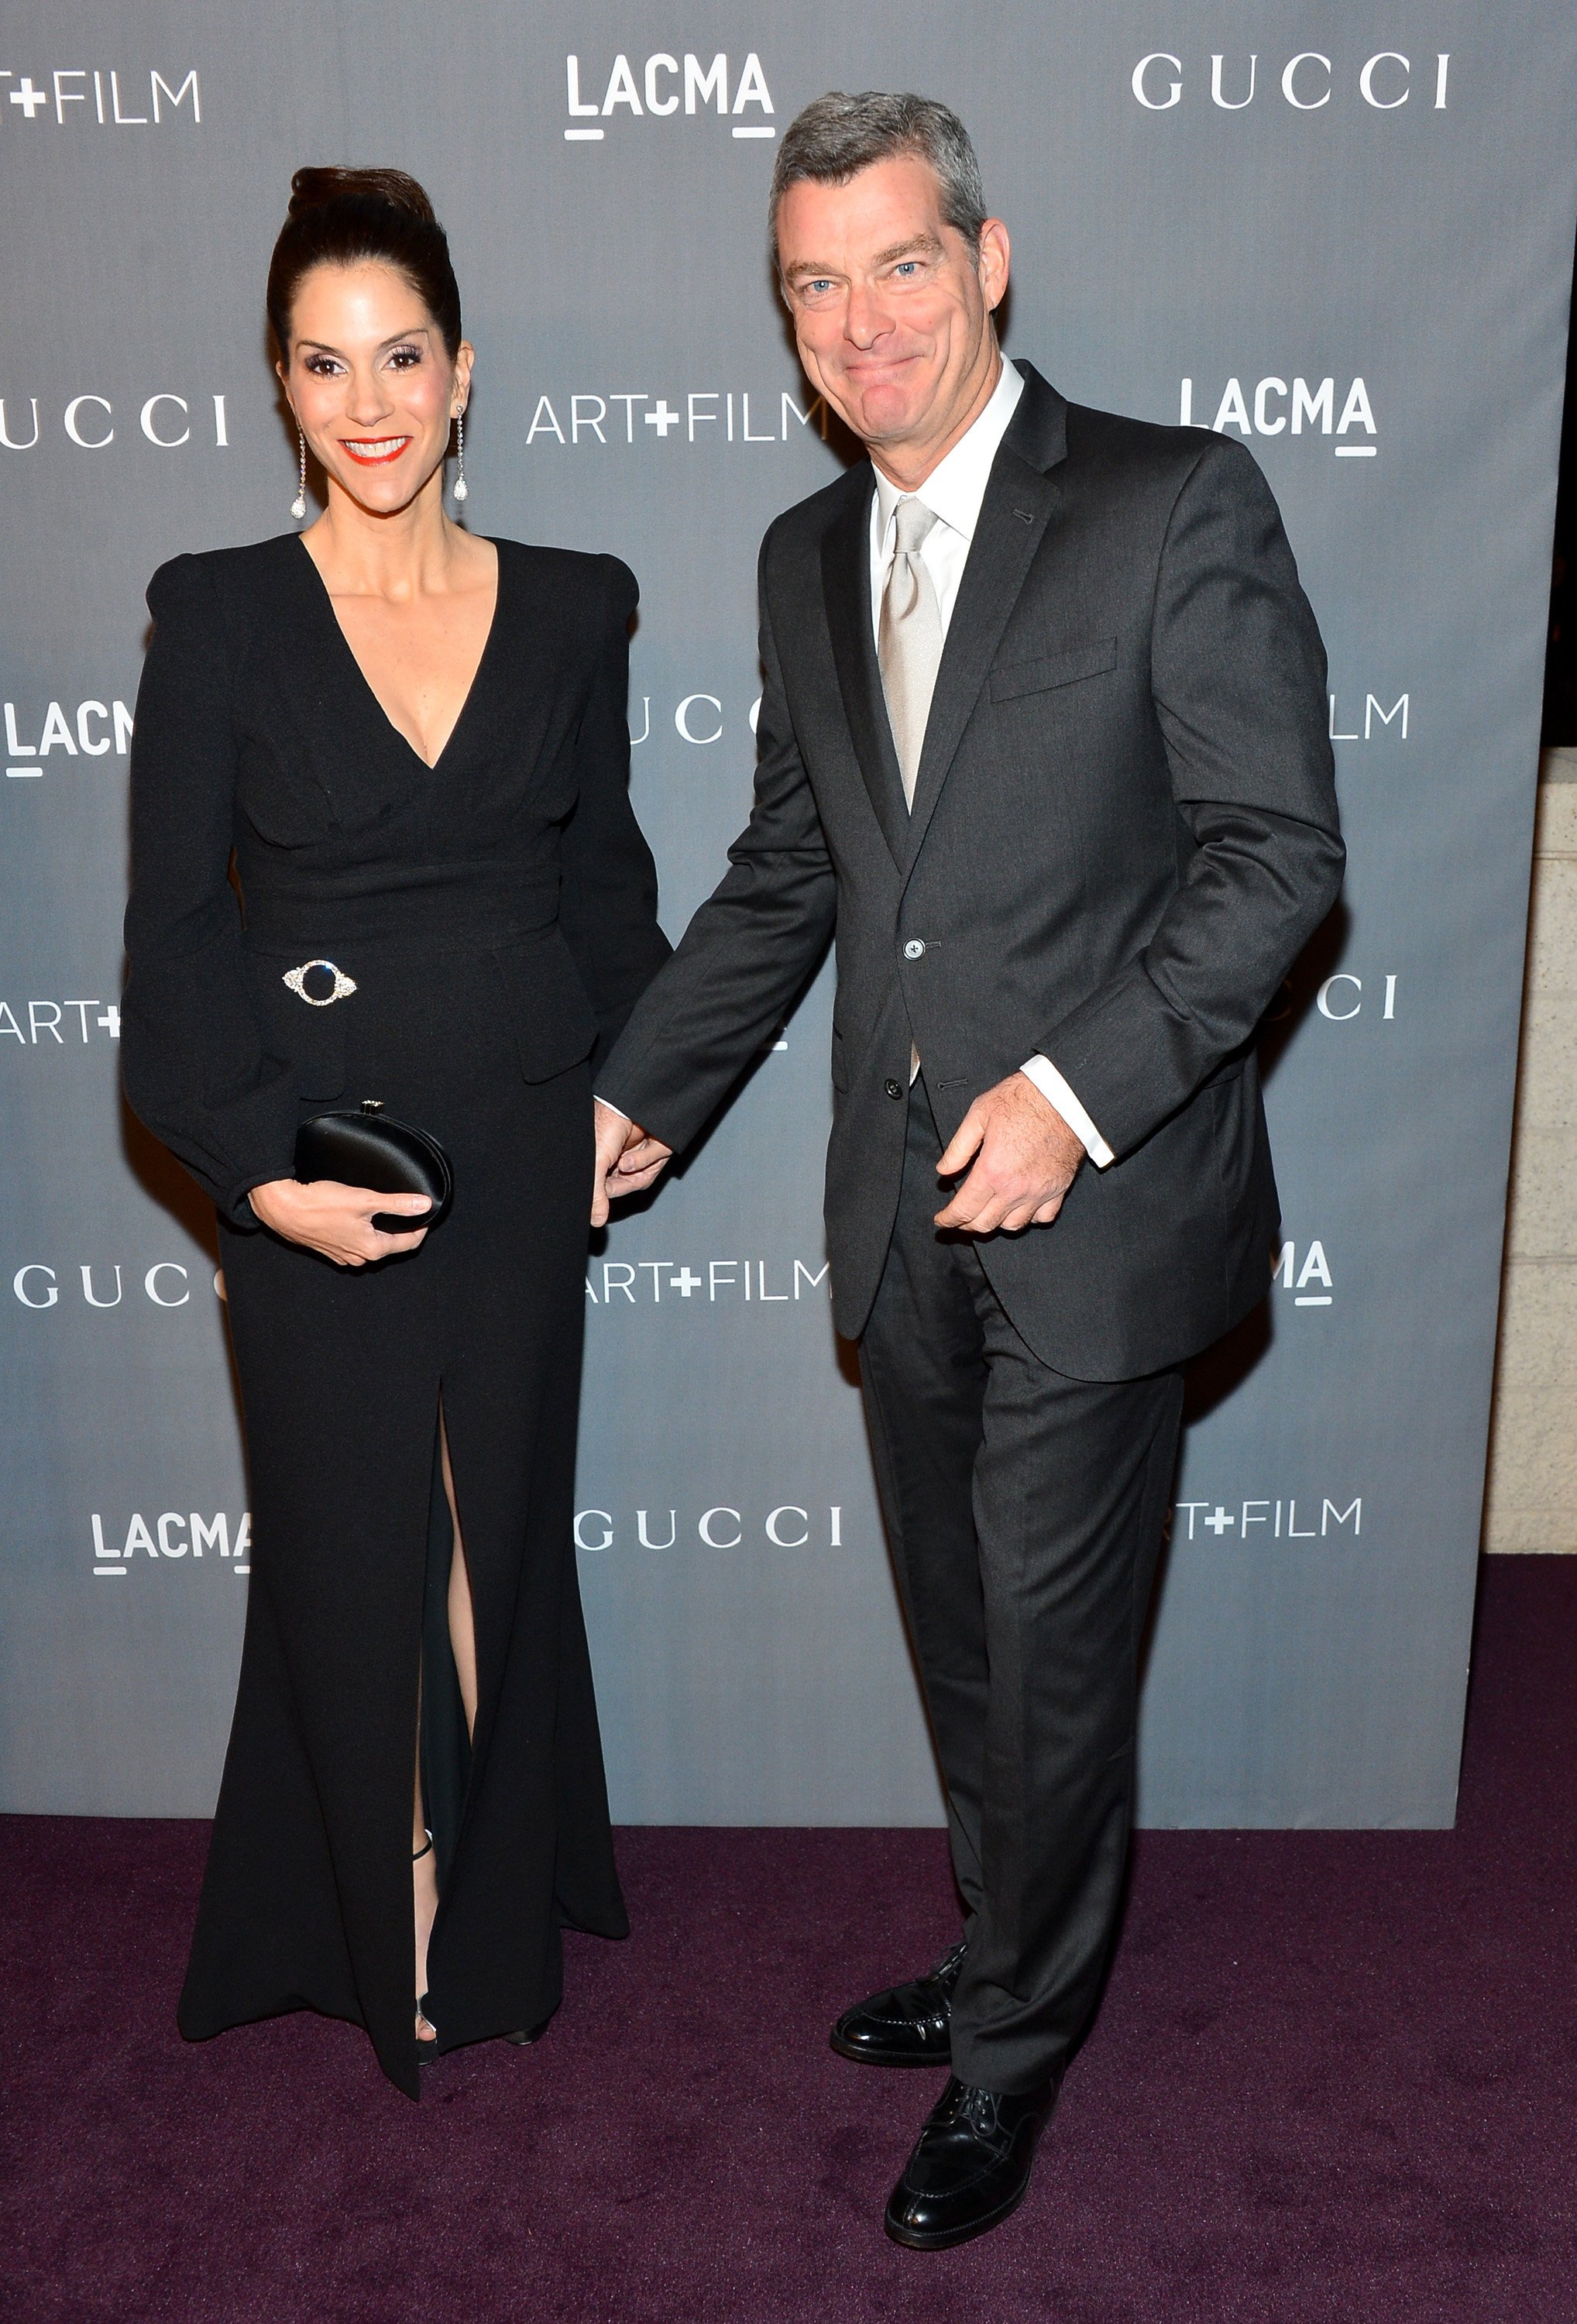 Jami Gertz and Antony Ressler arrive at LACMA 2012 Art + Film Gala at LACMA on October 27, 2012. | Source: Getty Images